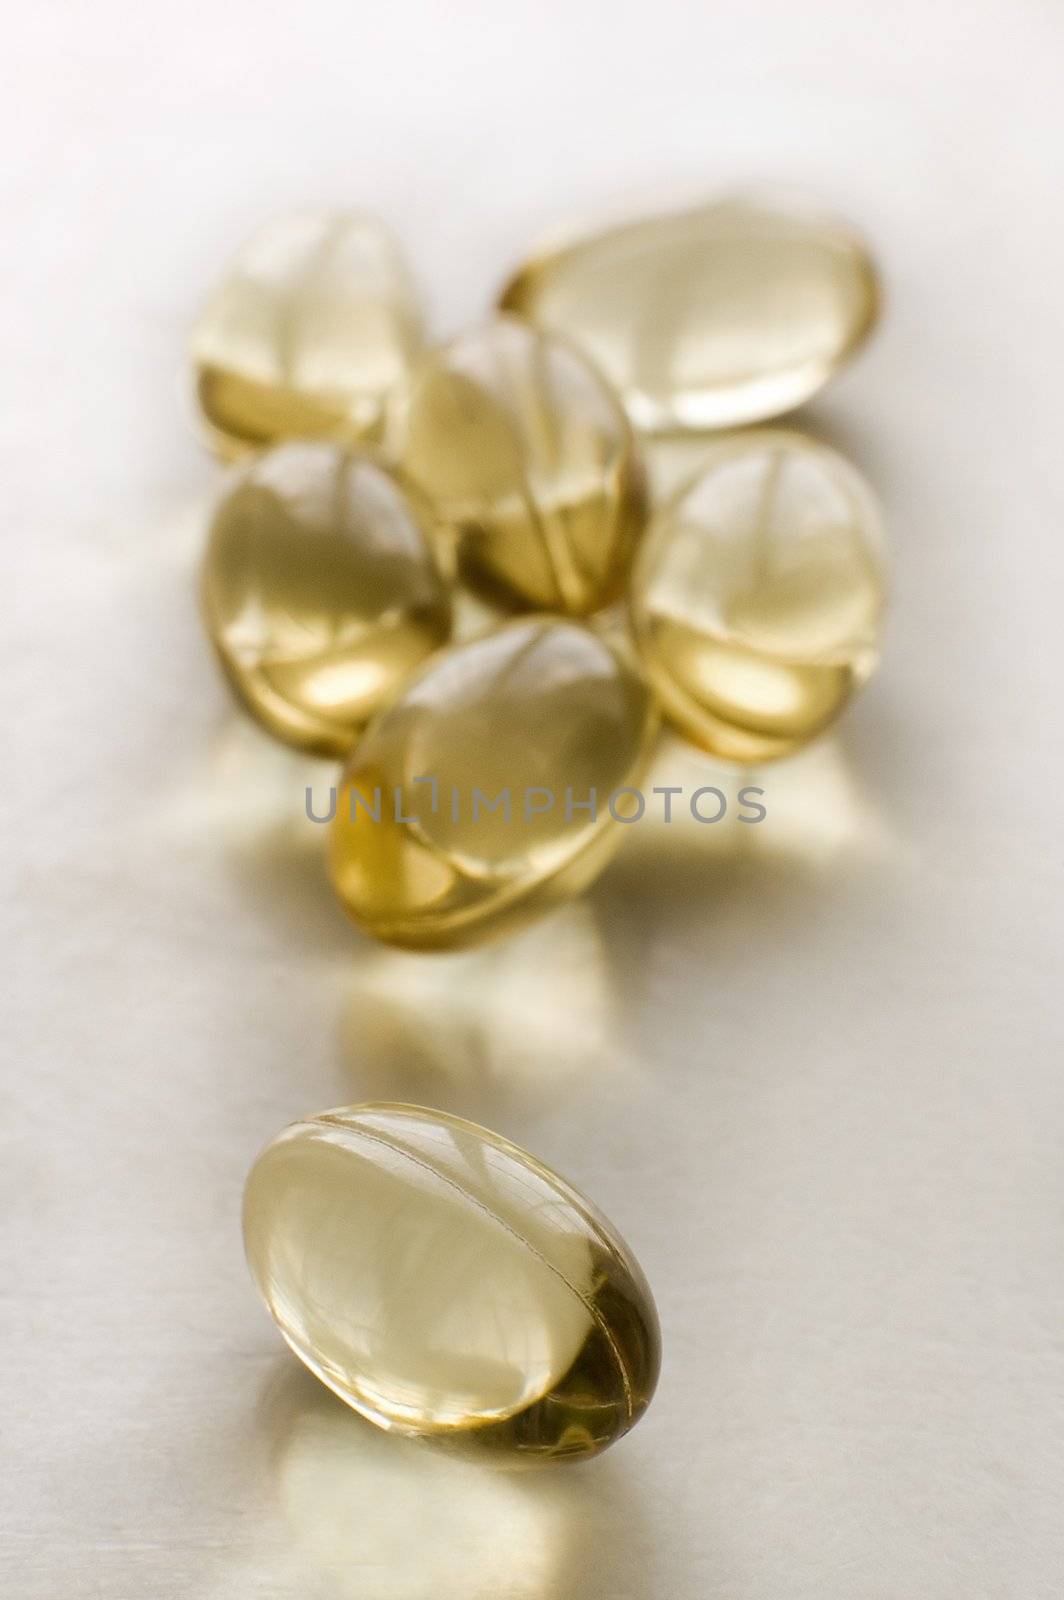 fish oil capsules on white background, shallow depth of view